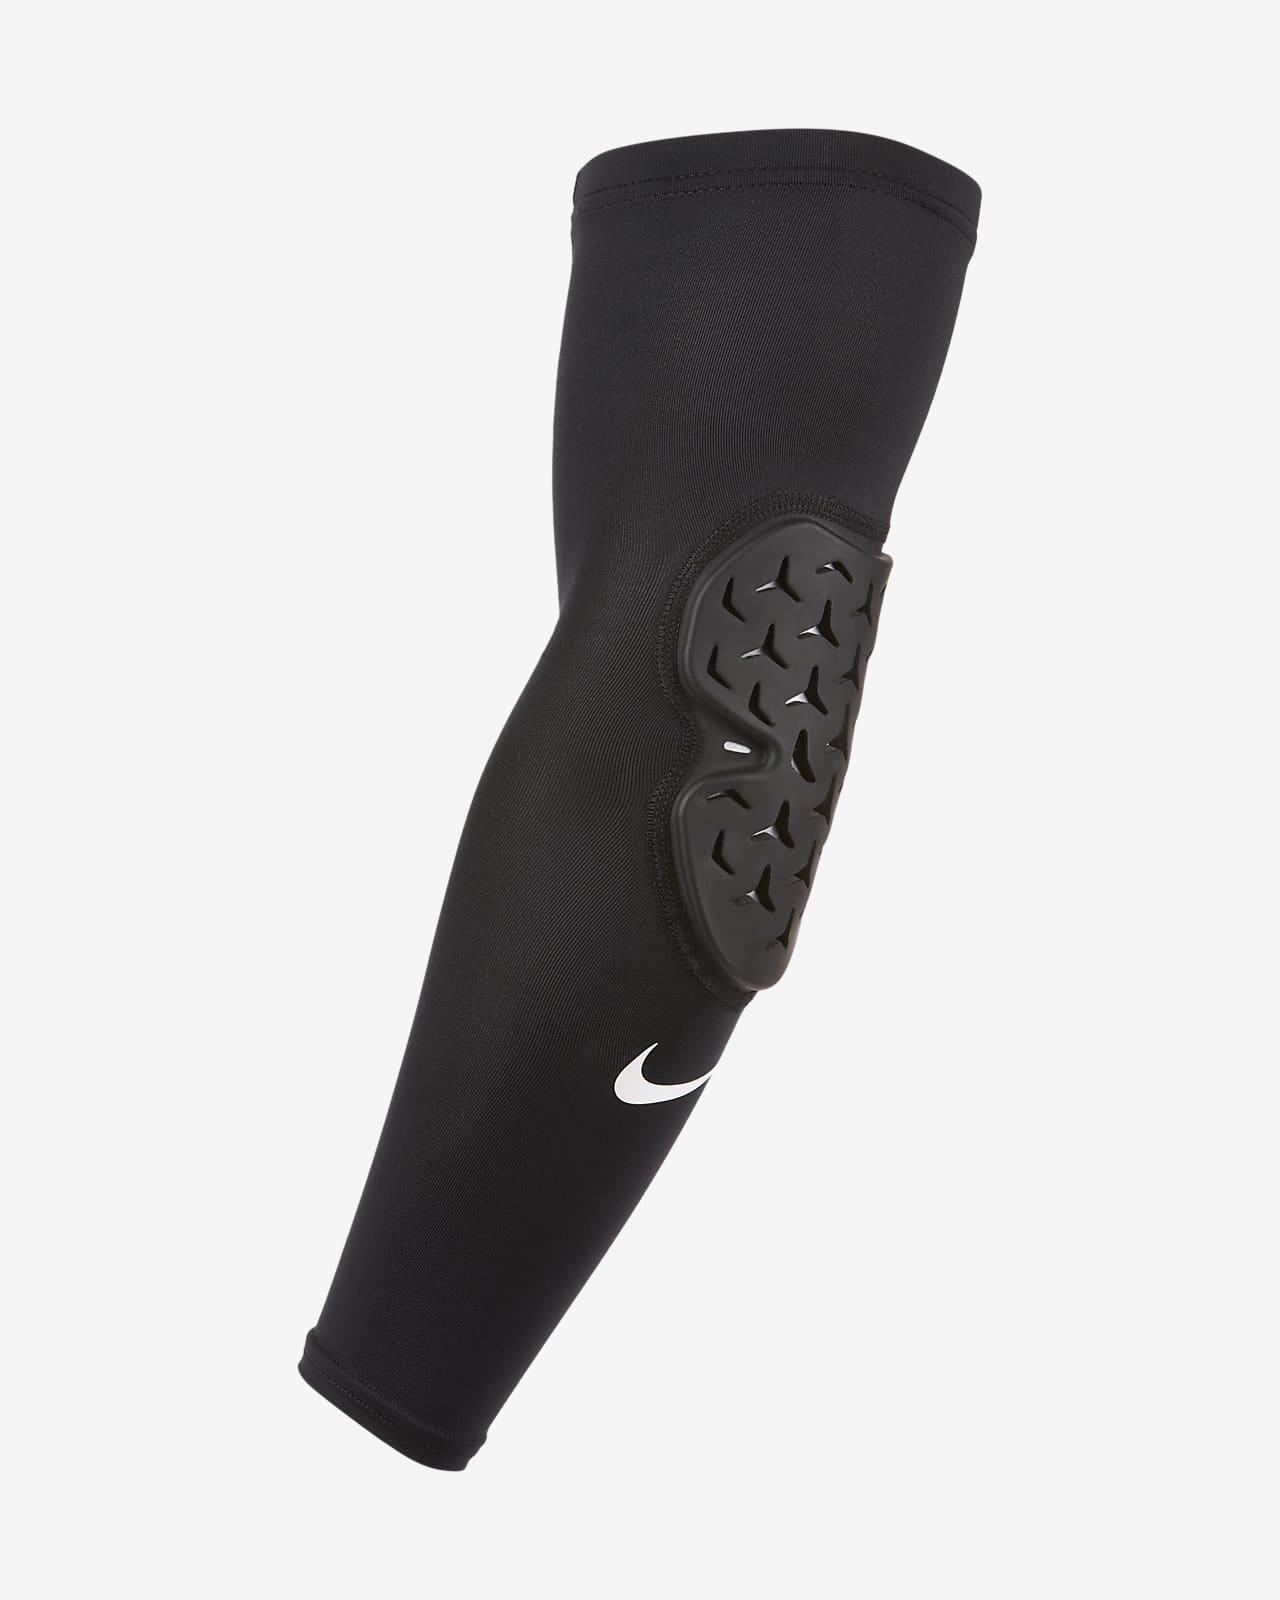 Nike Contact Support Elbow Sleeve